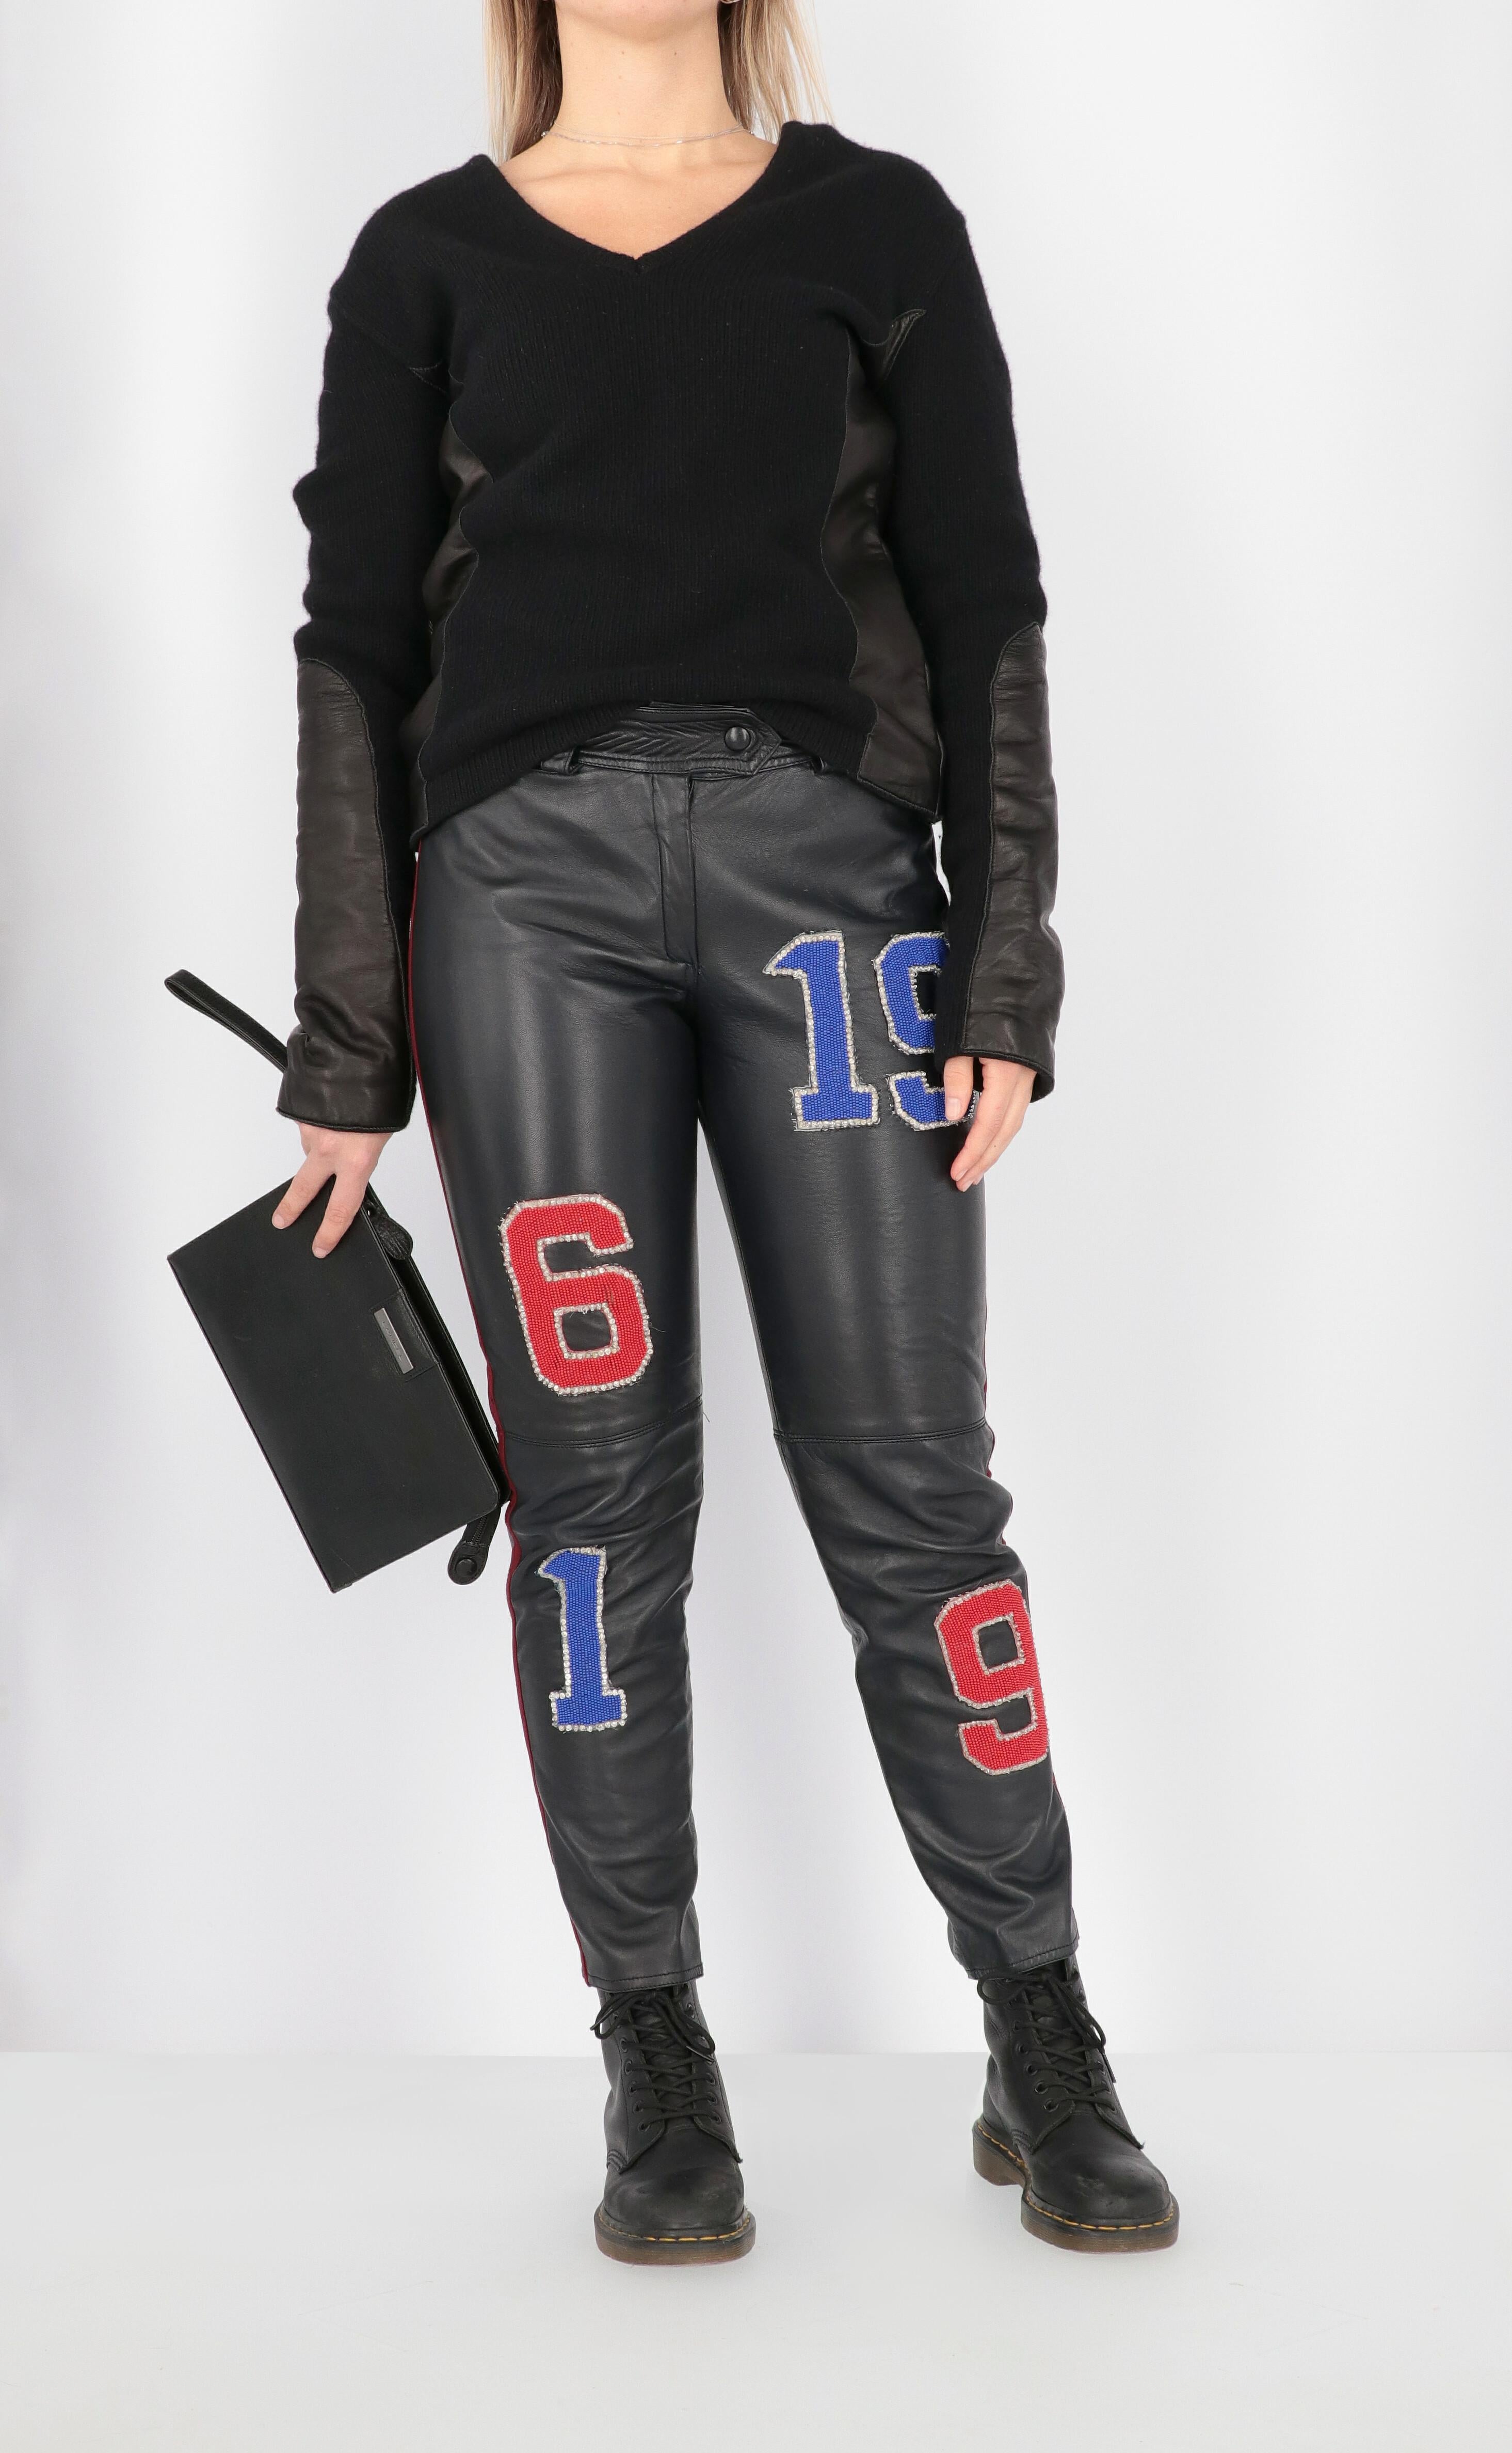 Blumarine by Anna Molinari genuine black leather straight trousers with burgundy side band and front beads embroidered in number shapes. Front closure with button and zip, belt loops and front welt pockets.

The product has some missing beads as